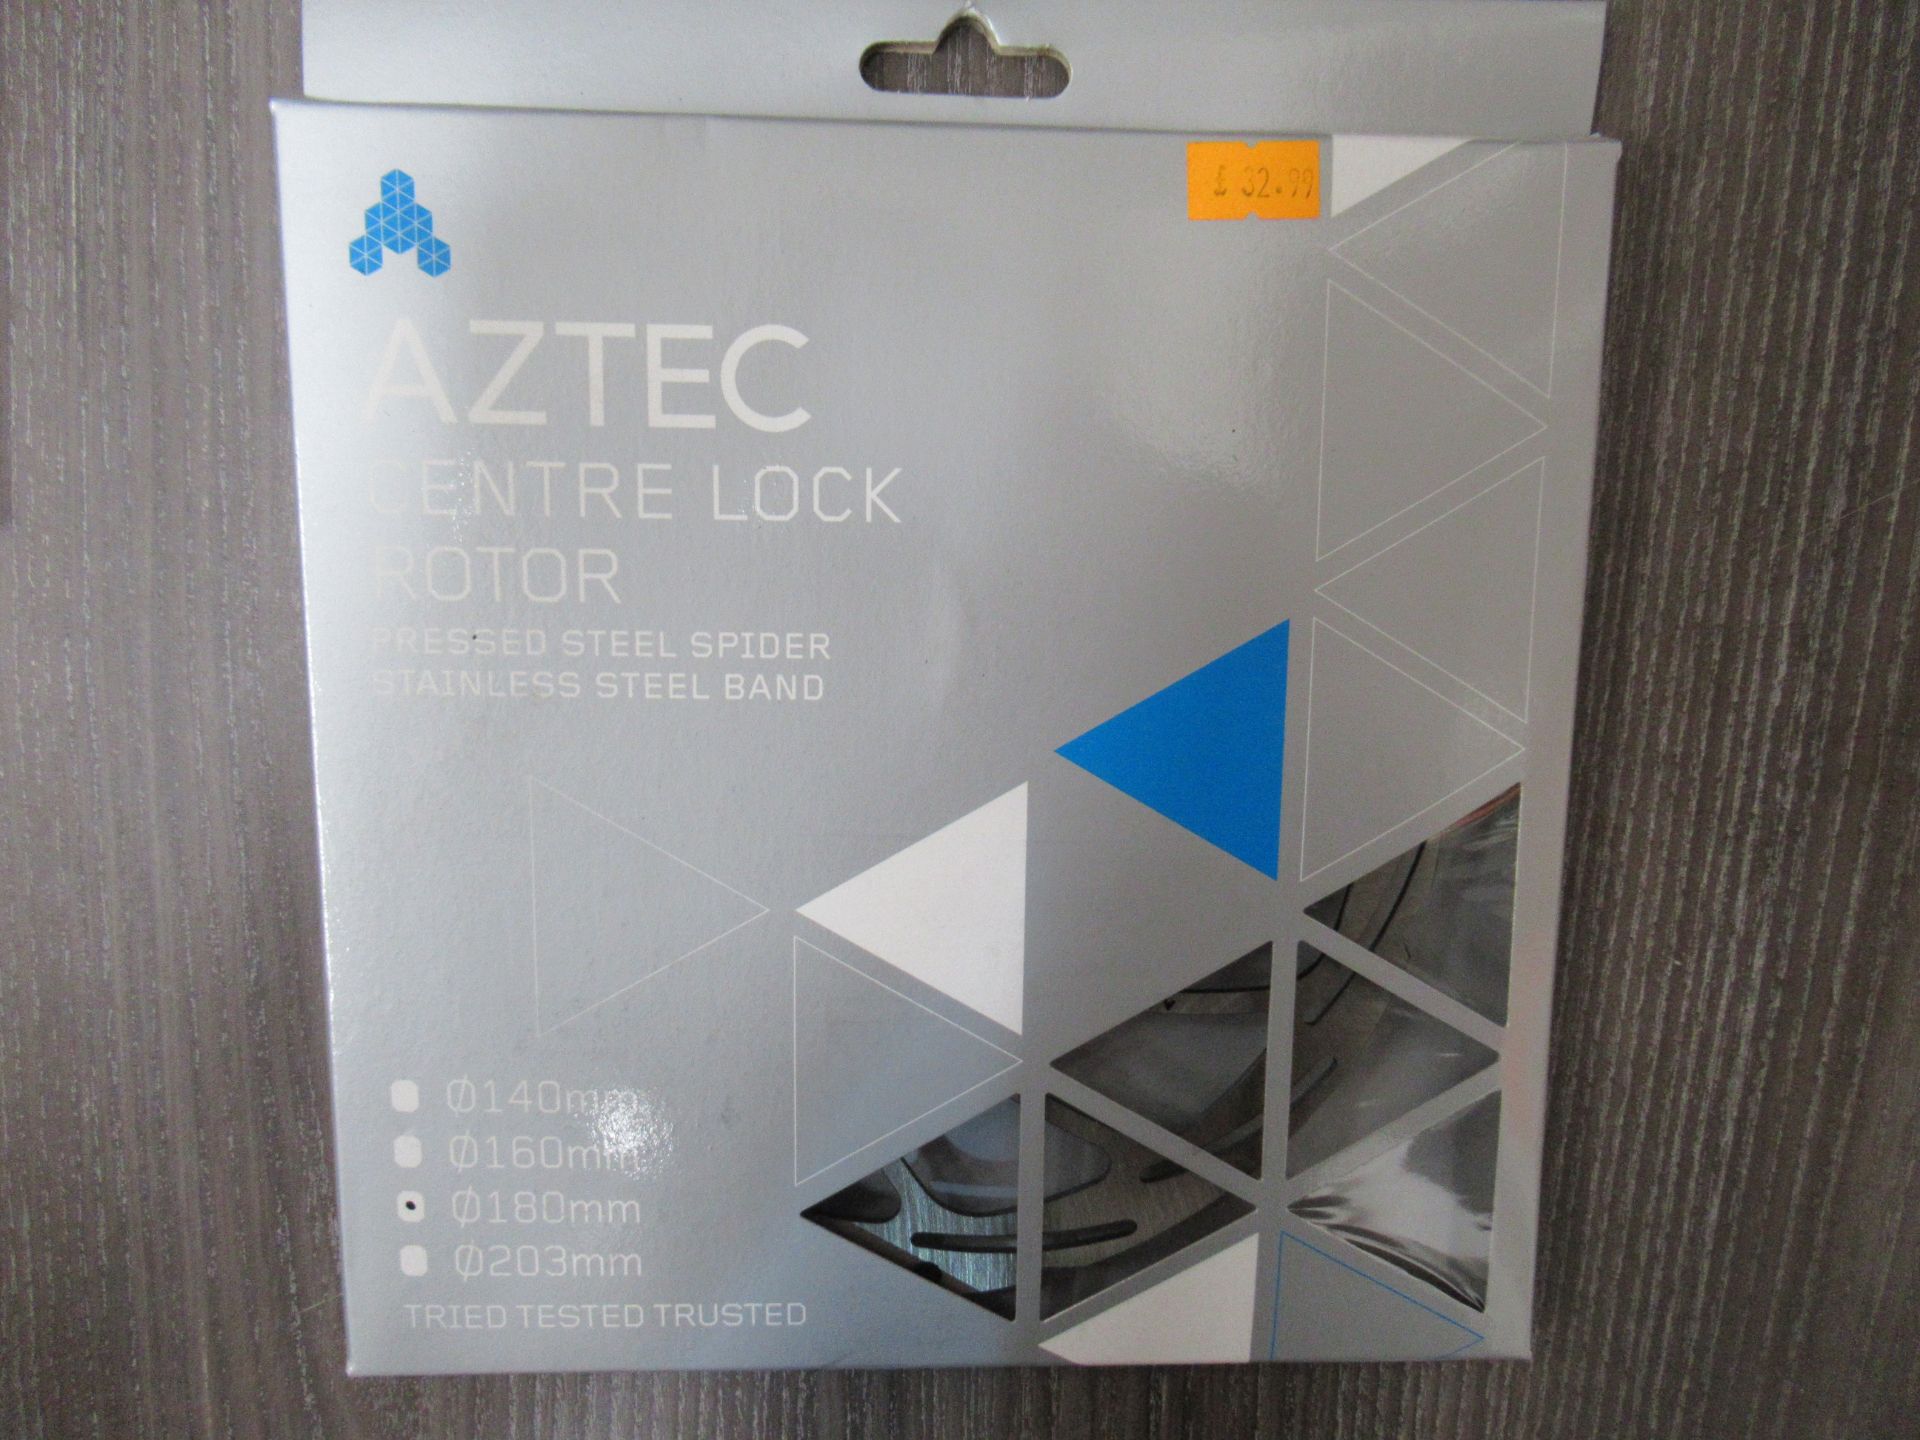 6 x Aztec Centre Lock Rotor's: 2 x 160mm (RRP£28.99 each); 3 x 180mm (RRP£32.99) and 1 x 203mm (RRP£ - Image 8 of 13